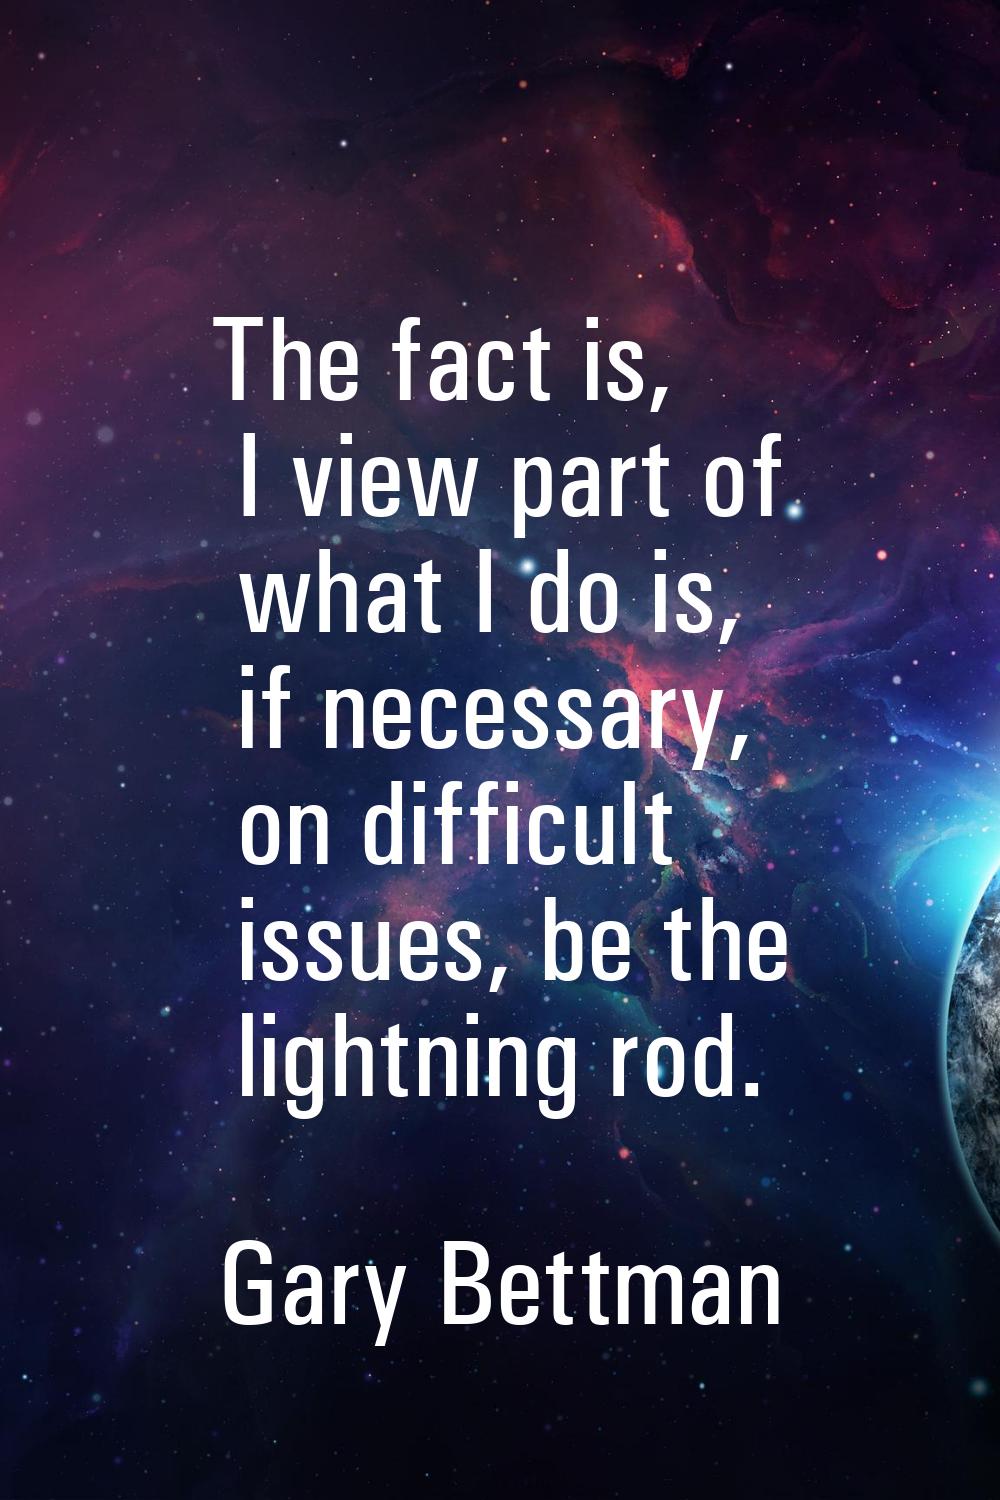 The fact is, I view part of what I do is, if necessary, on difficult issues, be the lightning rod.